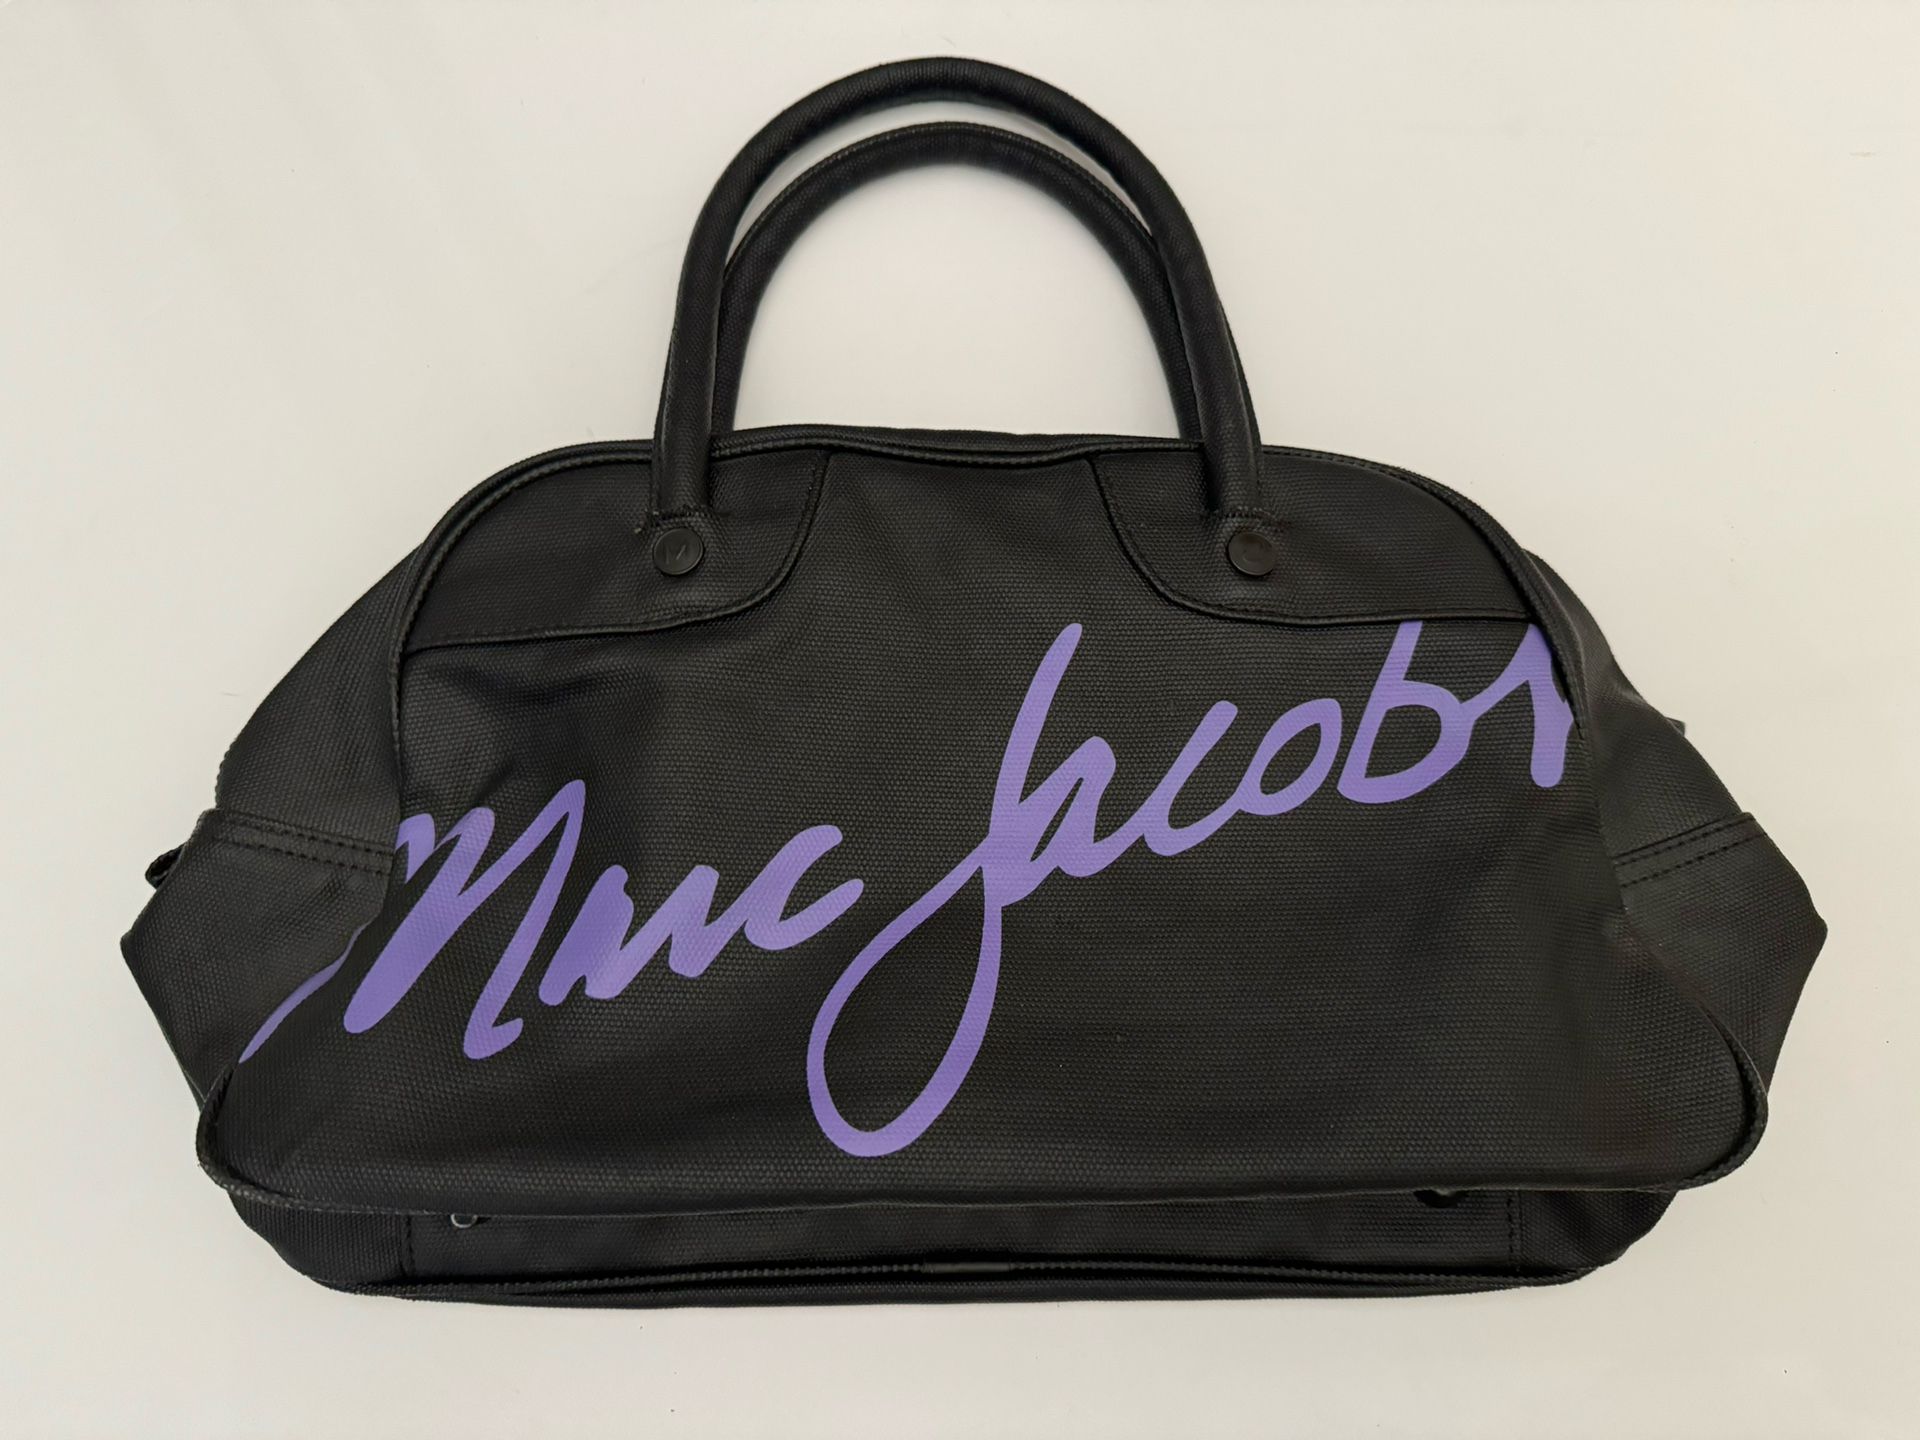 Jacobs by Marc Jacobs - Black tote bag with Purple logo